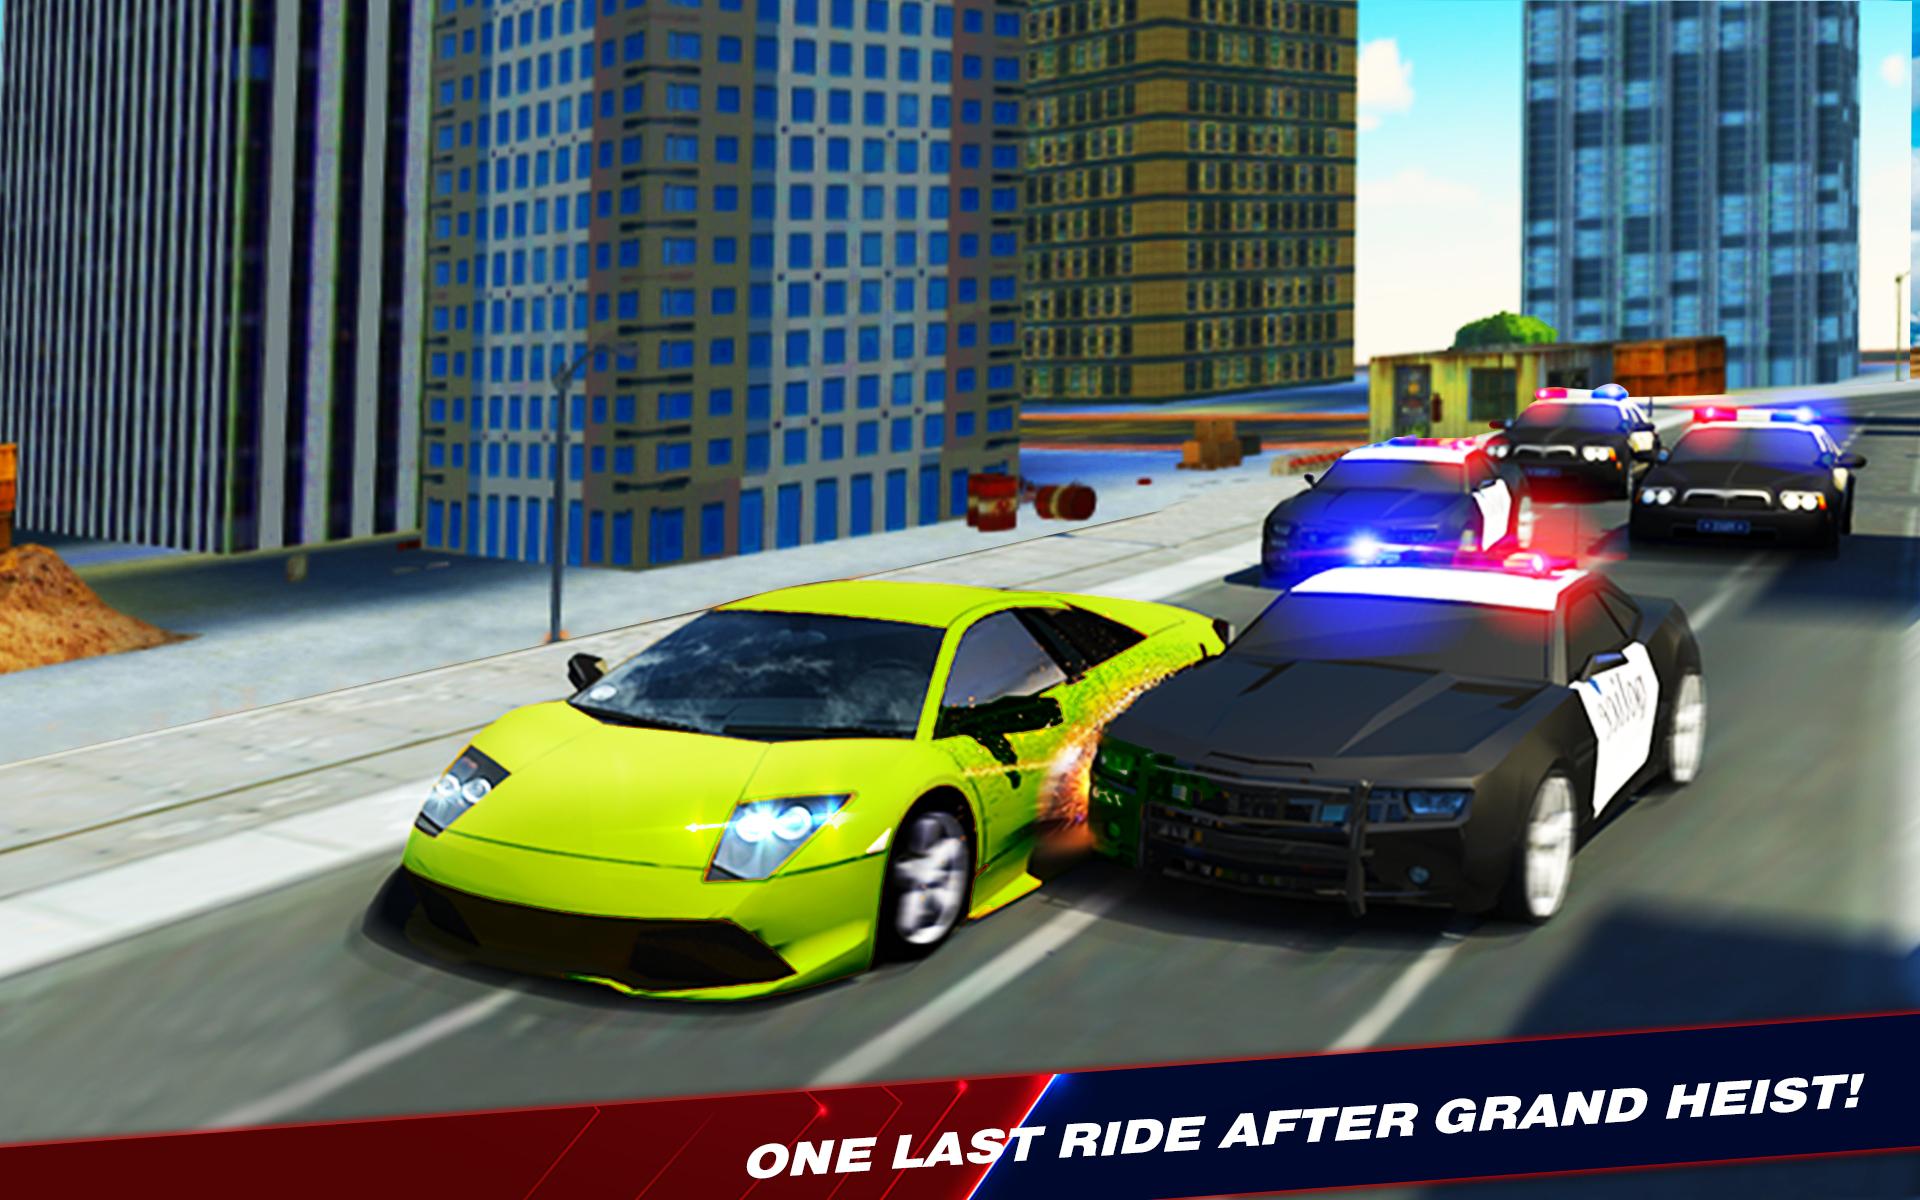 Real Police Car Chase Simulator 2018 Crime Police For Android Apk Download - police simulator 2018 huge updates roblox